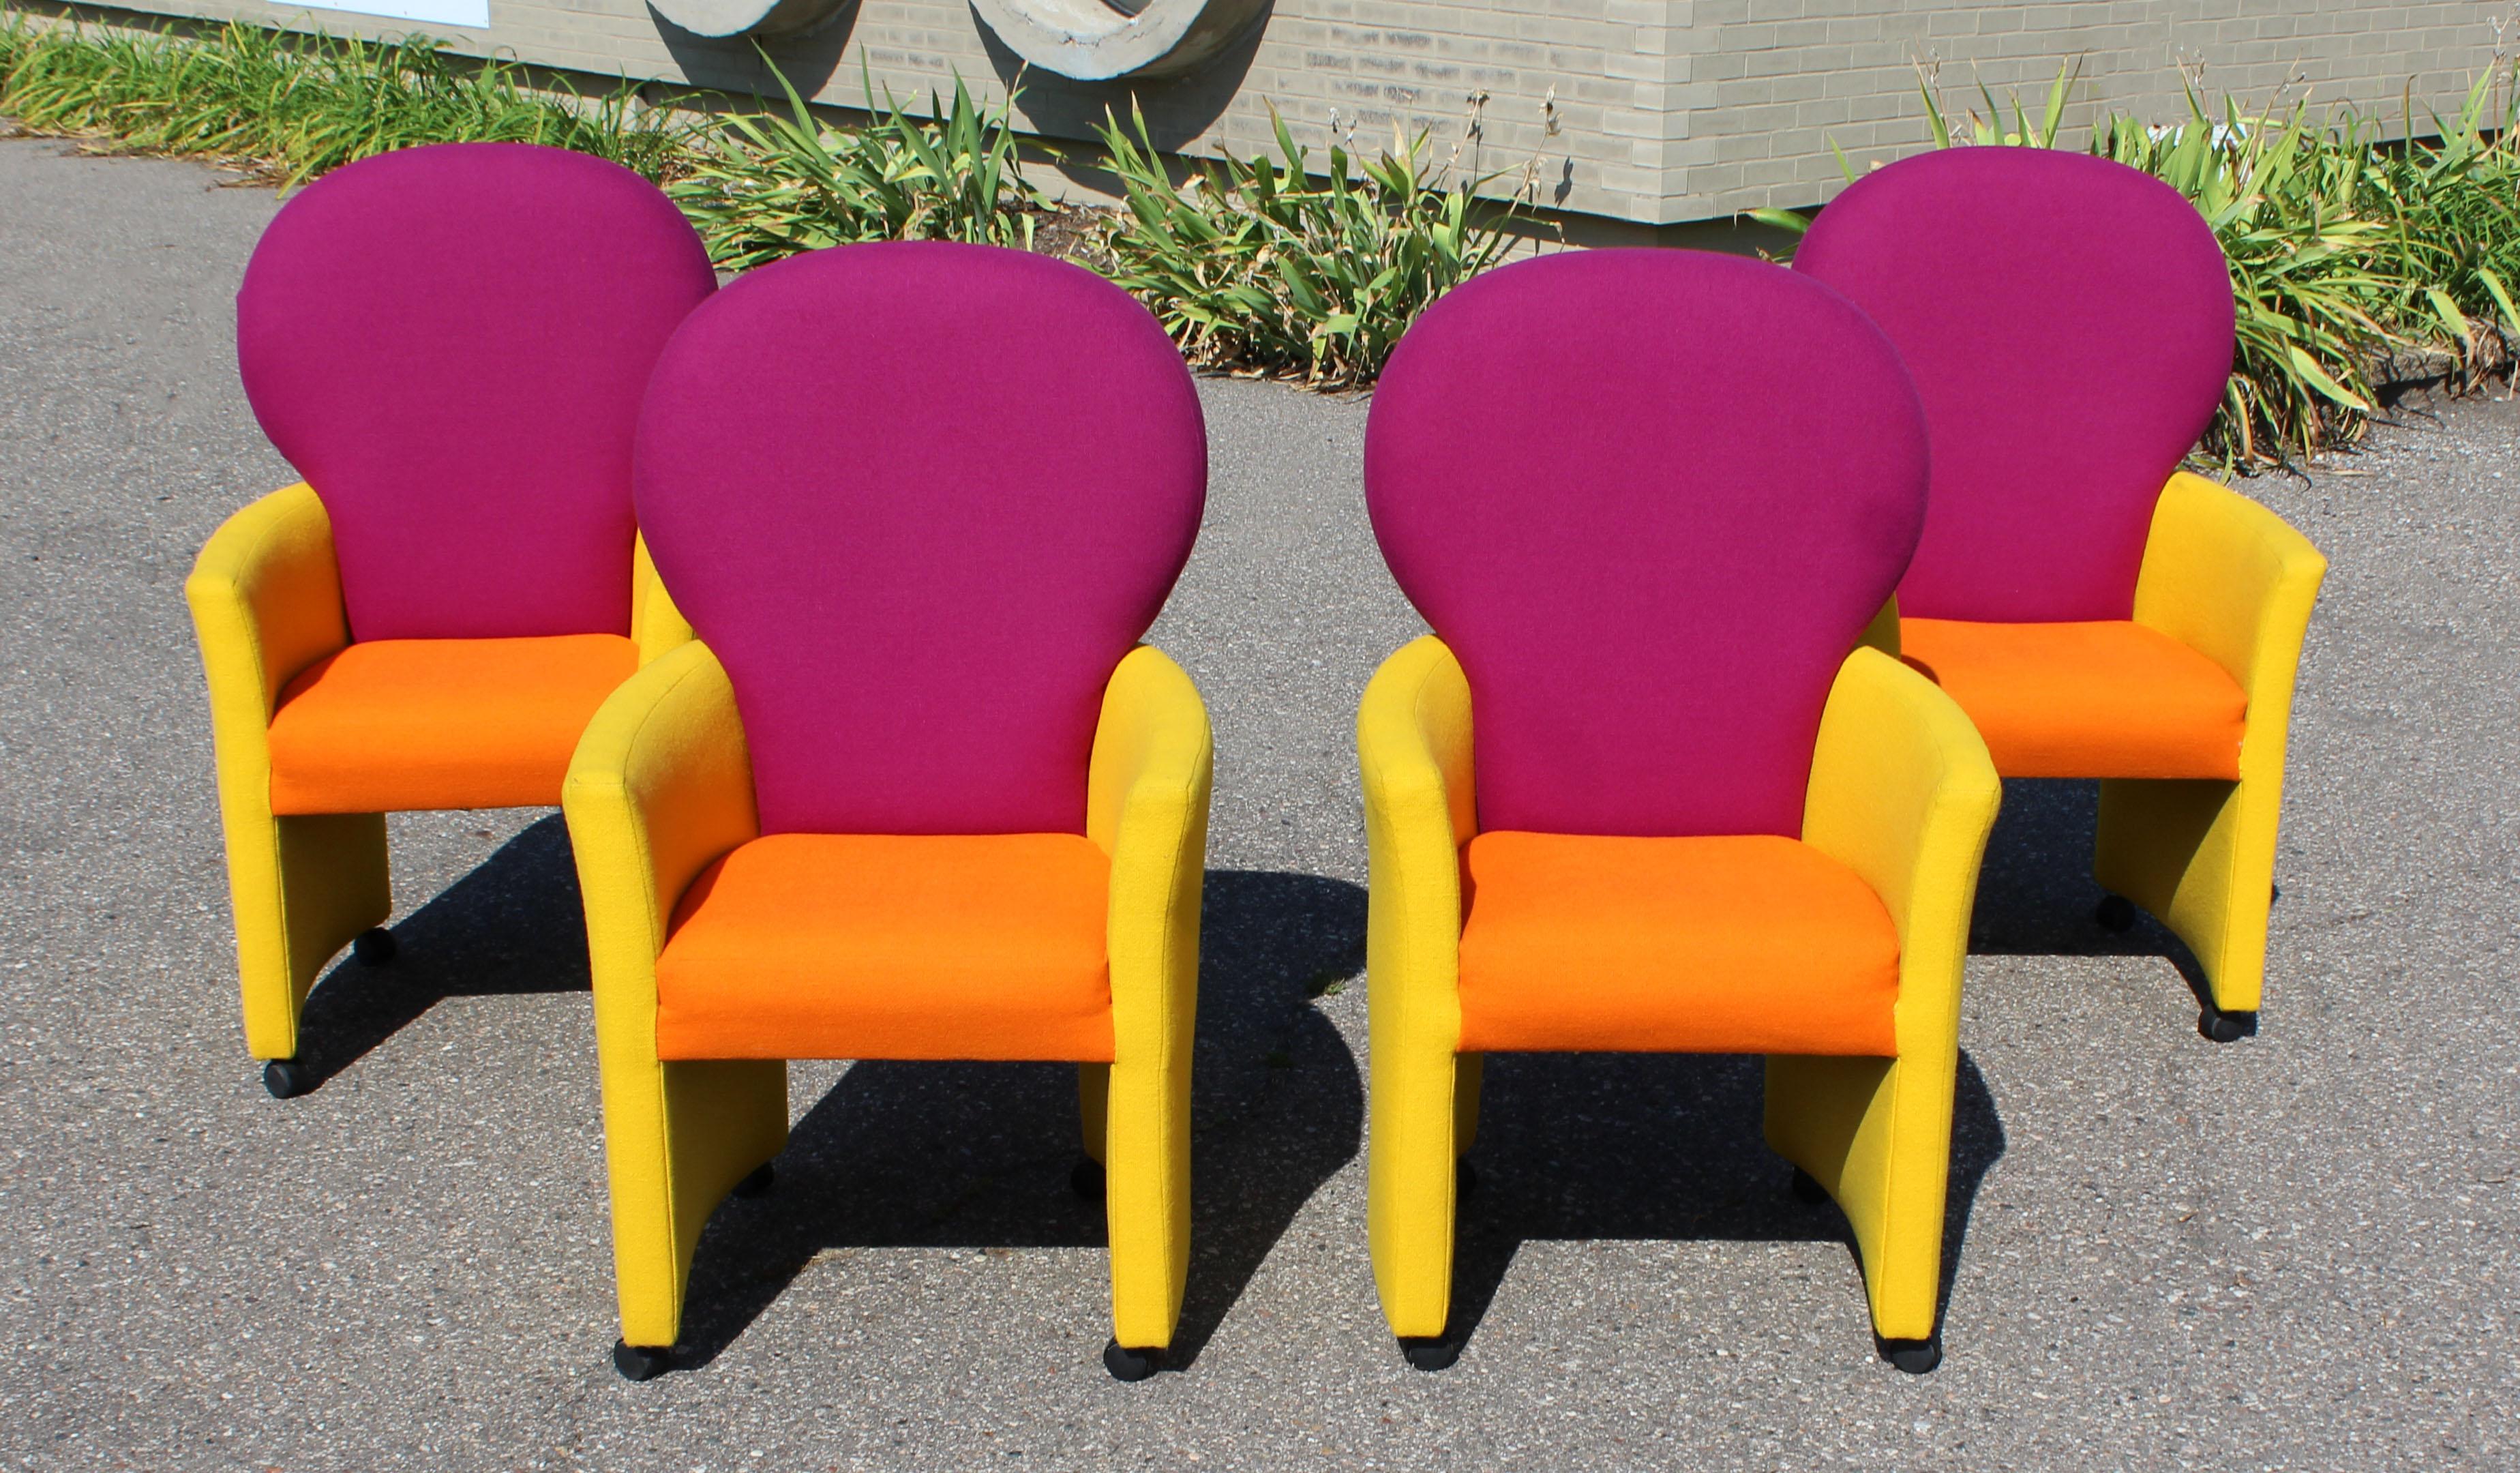 For your consideration is a phenomenal, set of four lounge armchairs, with purple backs, orange seats and yellow sides, by Milo Baughman for Thayer Coggin, circa 1970s. In excellent condition. The dimensions are 25